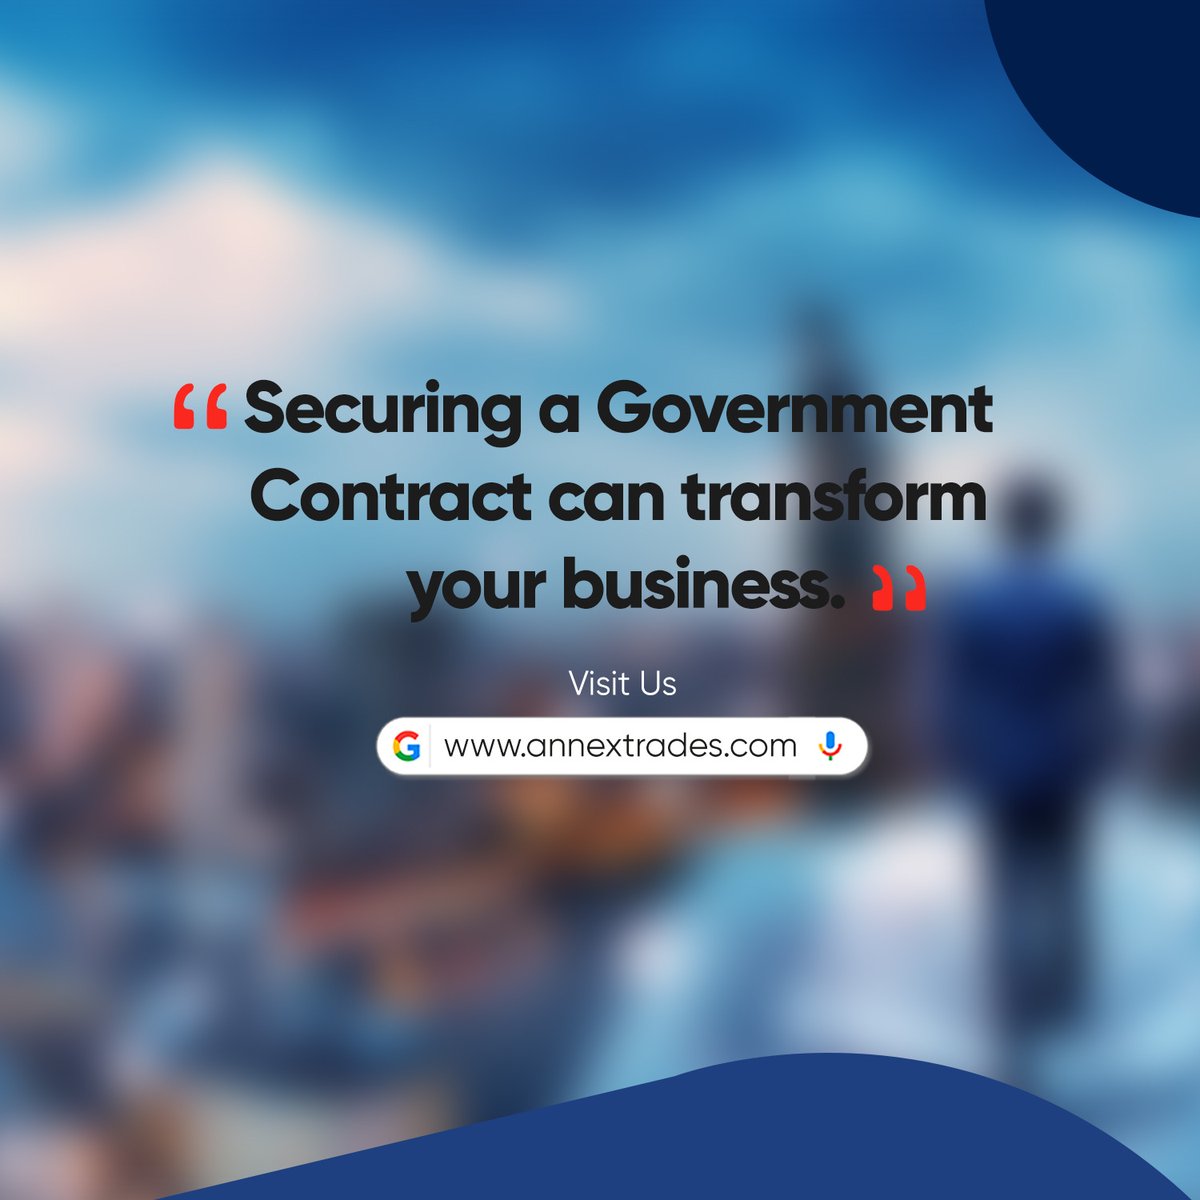 Learn more at annextrades.com and unlock a world of possibilities.

#BusinessGrowth #ContractWins #Opportunity #usnews #usbiz #bids #businessowner #contracts #govcon #contractors #US #bidsgov #trading #suppliers #contracting #usbusiness #profits #trends #likes #share